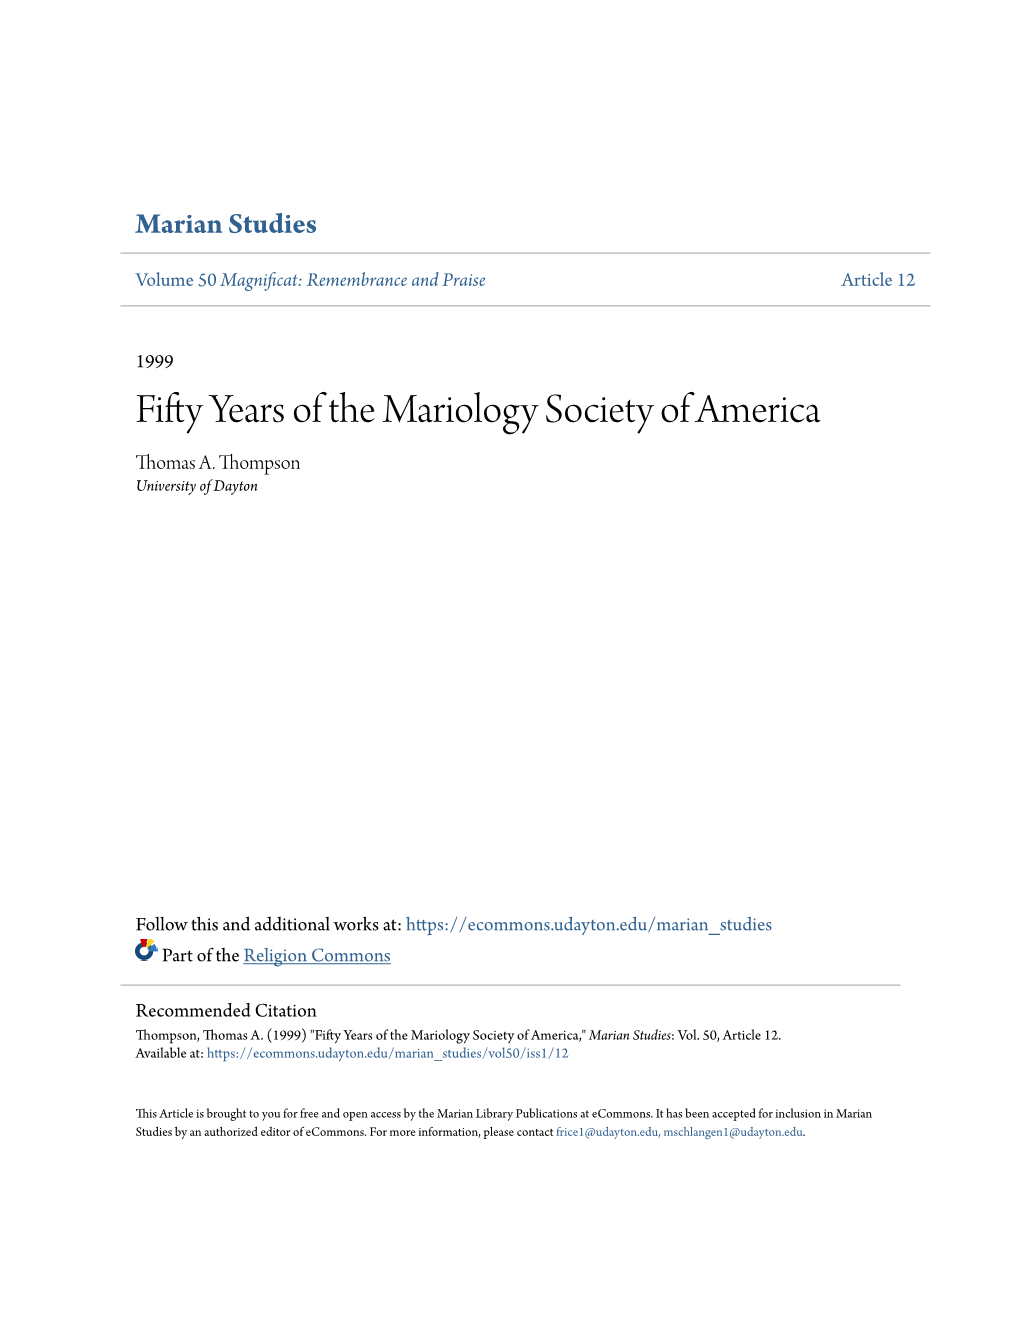 Fifty Years of the Mariology Society of America Thomas A